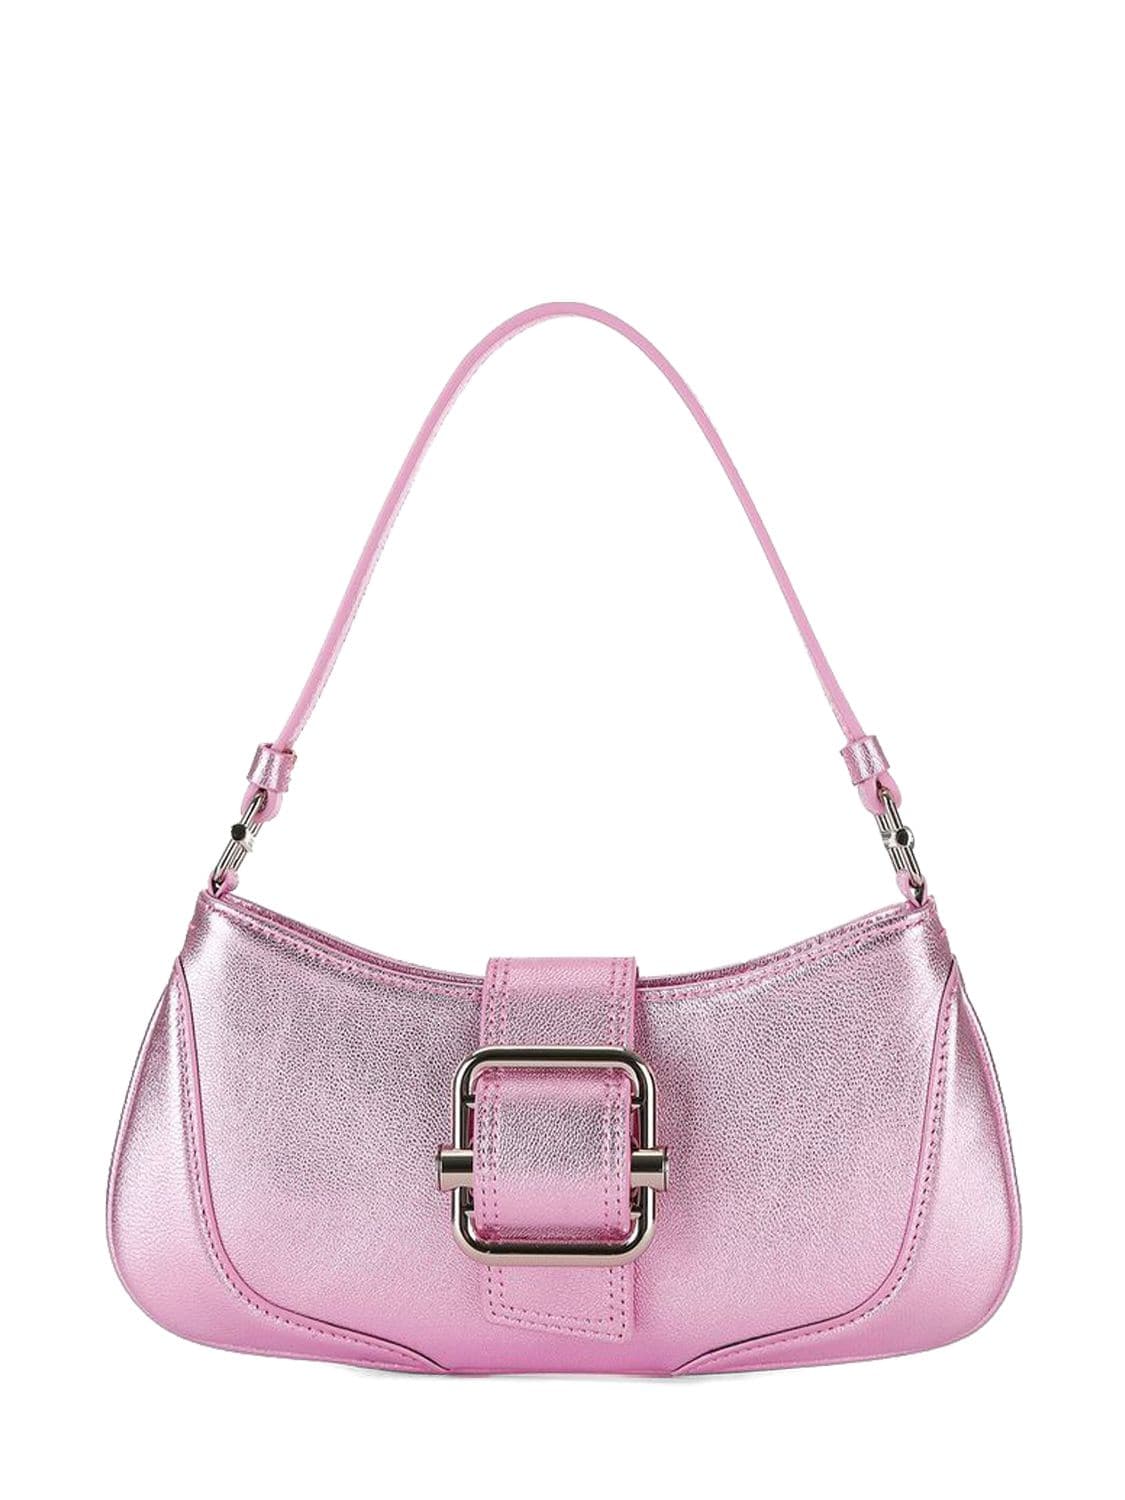 Osoi Small Brocle Leather Shoulder Bag In Metallic Pink